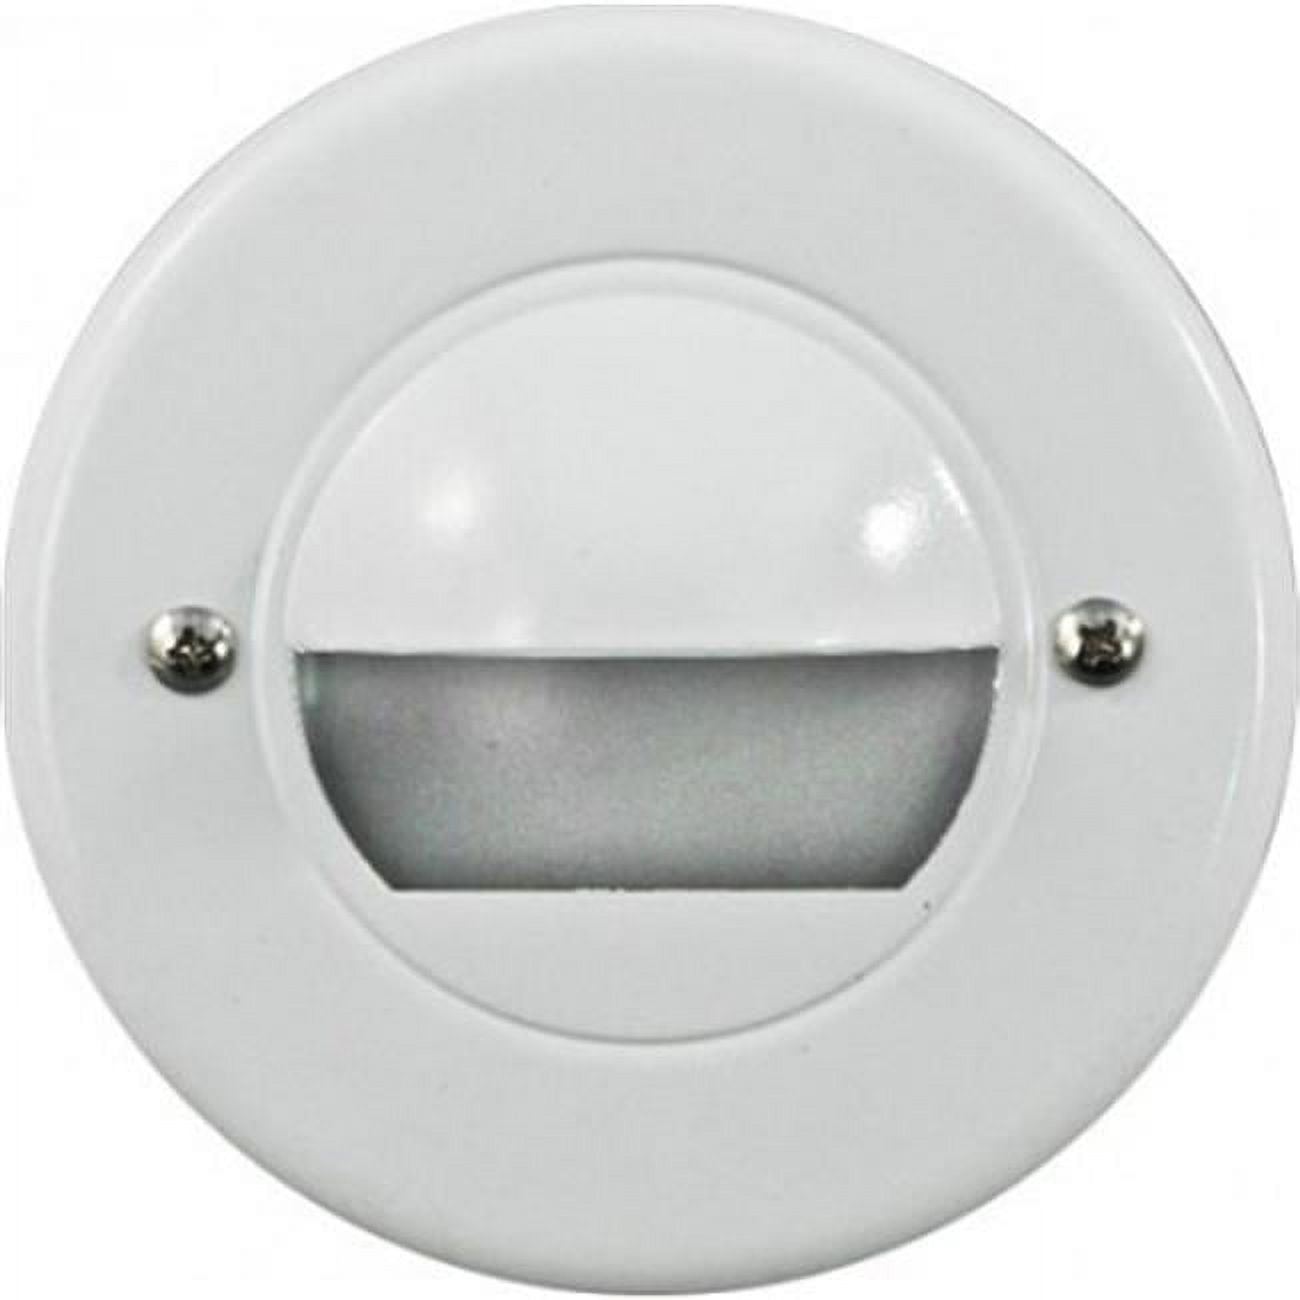 Picture of Dabmar Lighting LV702-W Cast Aluminum Recessed Open Face Brick, Step & Wall Light, White - 4.75 x 4.75 x 2.69 in.